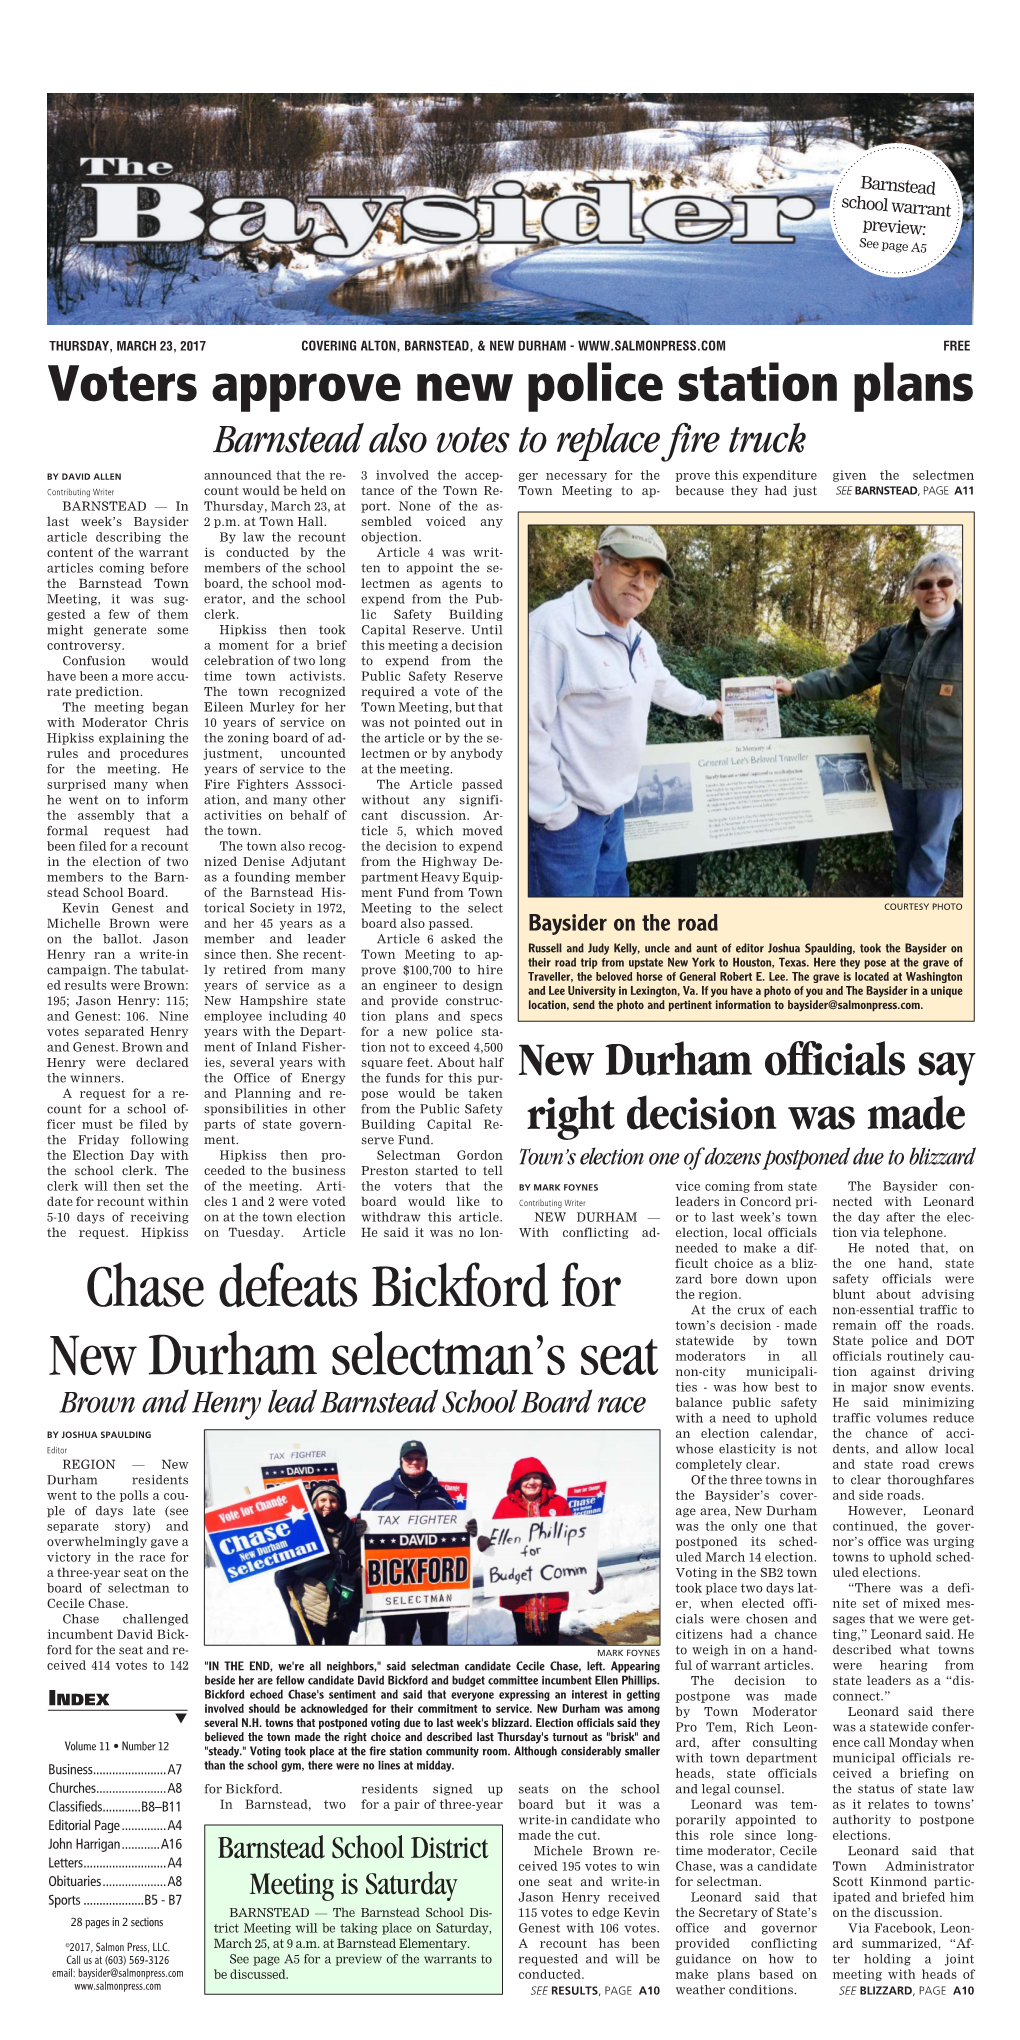 Chase Defeats Bickford for New Durham Selectman's Seat